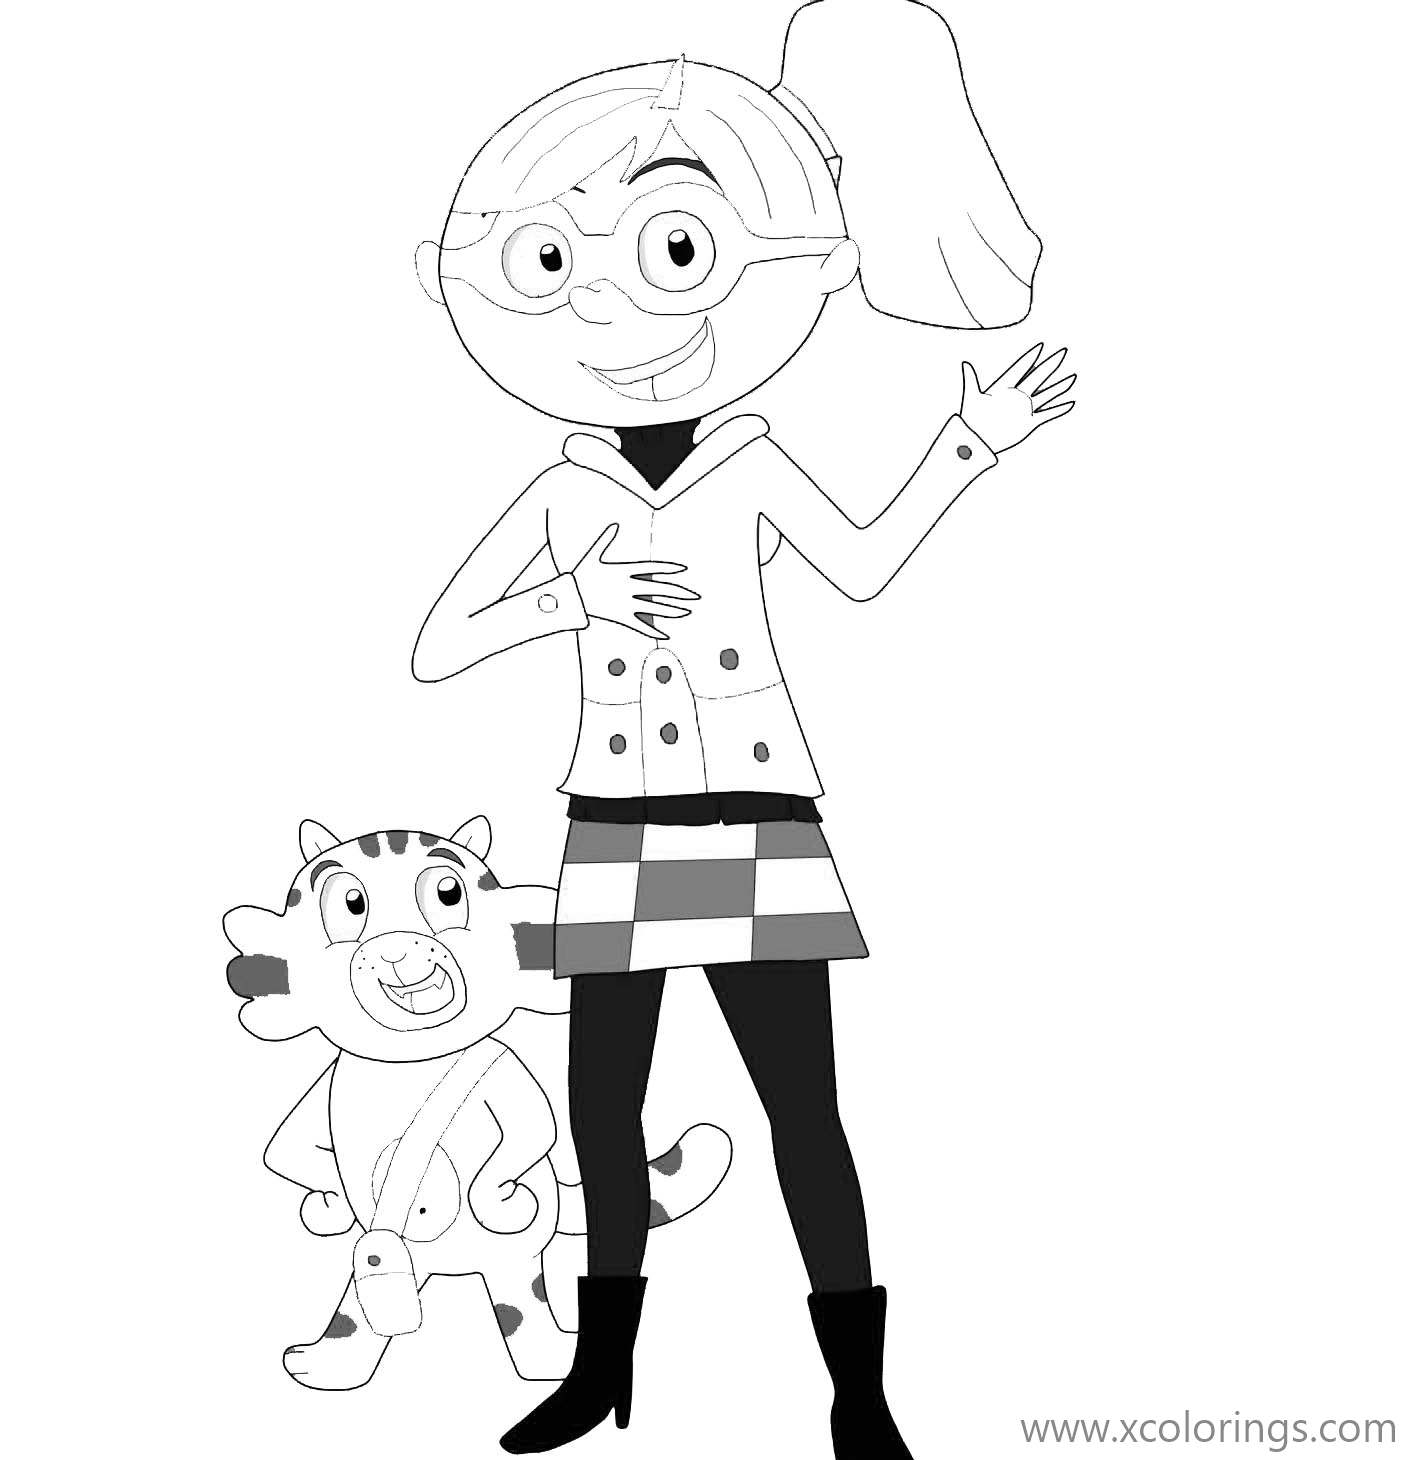 Free Mirette Investigates Coloring Pages Fanart by asmodeodesinan printable